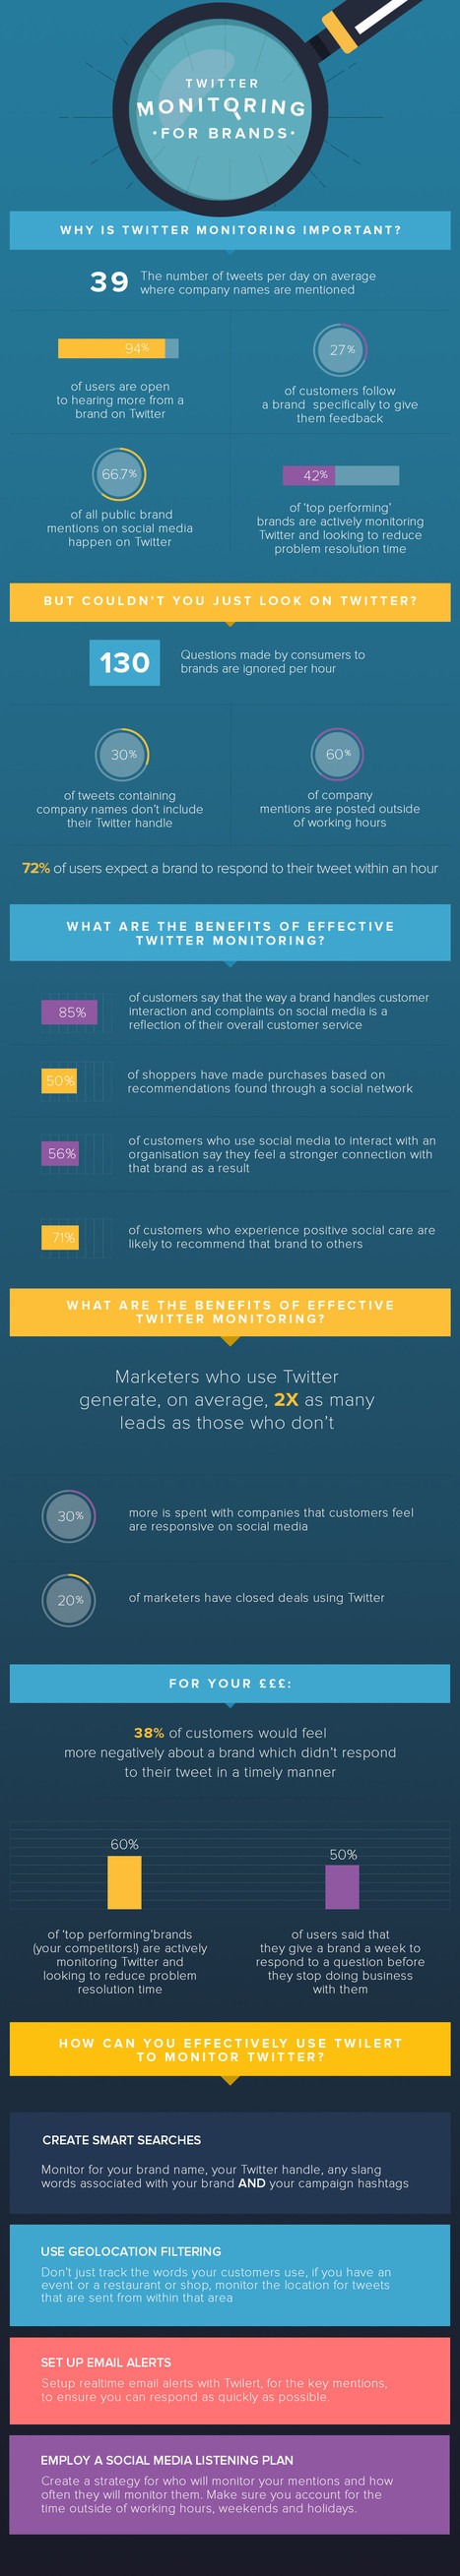 Why Is Twitter Monitoring Important? - #infographic - Digital Information World | The MarTech Digest | Scoop.it